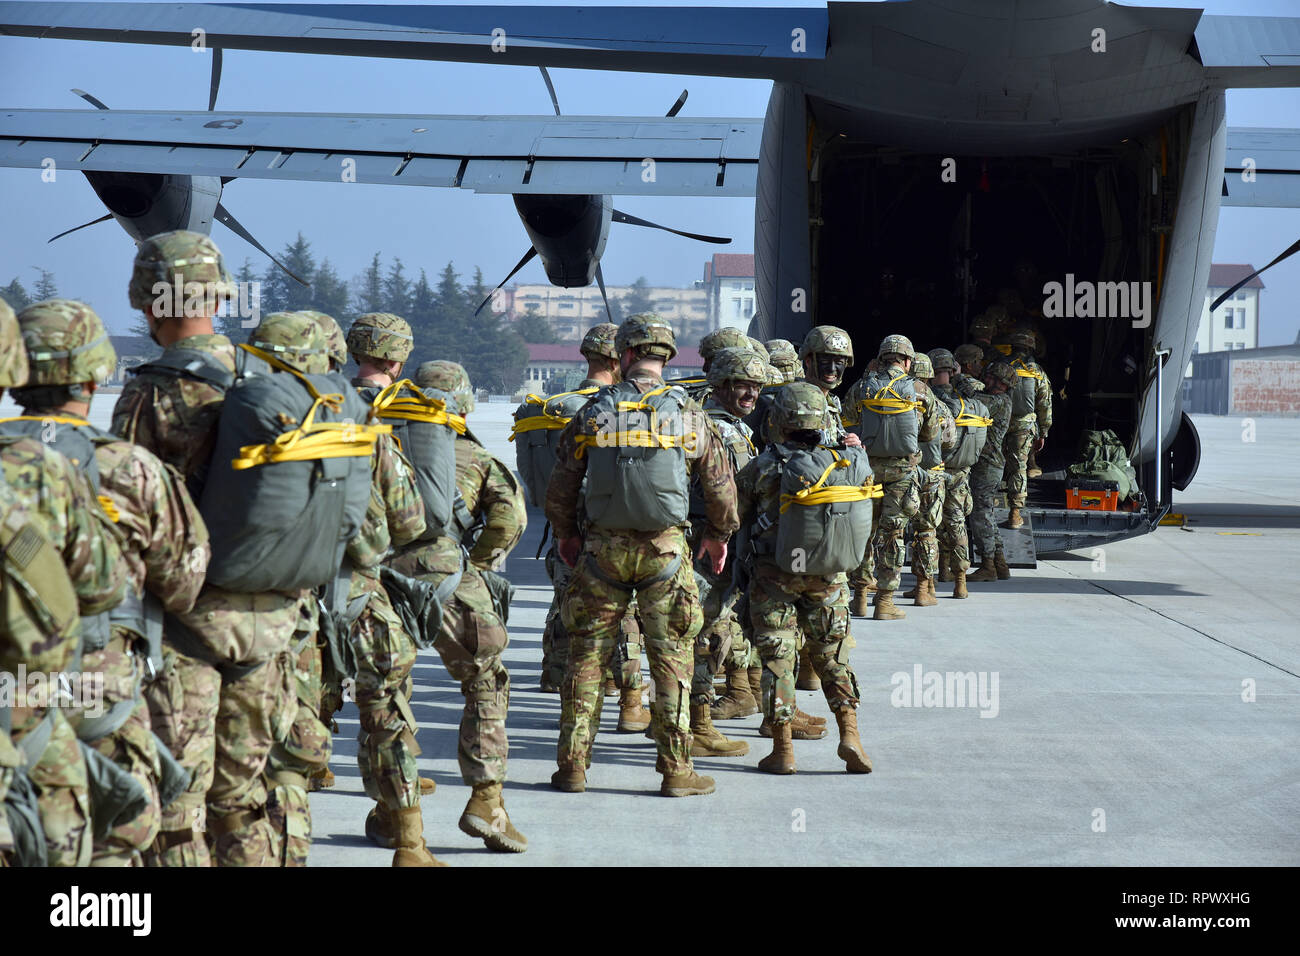 U.S. Army Paratroopers assigned to the 173rd Airborne Brigade, prepare to board a U.S. Air Force C-130 Hercules aircraft from the 86th Air Wing at Aviano Air Base, in preparation for airborne operations onto Juliet Drop Zone, Pordenone, Italy Feb. 21, 2019. The 173rd Airborne Brigade is the U.S. Army Contingency Response Force in Europe, capable of projecting ready forces anywhere in the U.S. European, Africa or Central Commands' areas of responsibility. (U.S. Army Photo by Paolo Bovo) Stock Photo